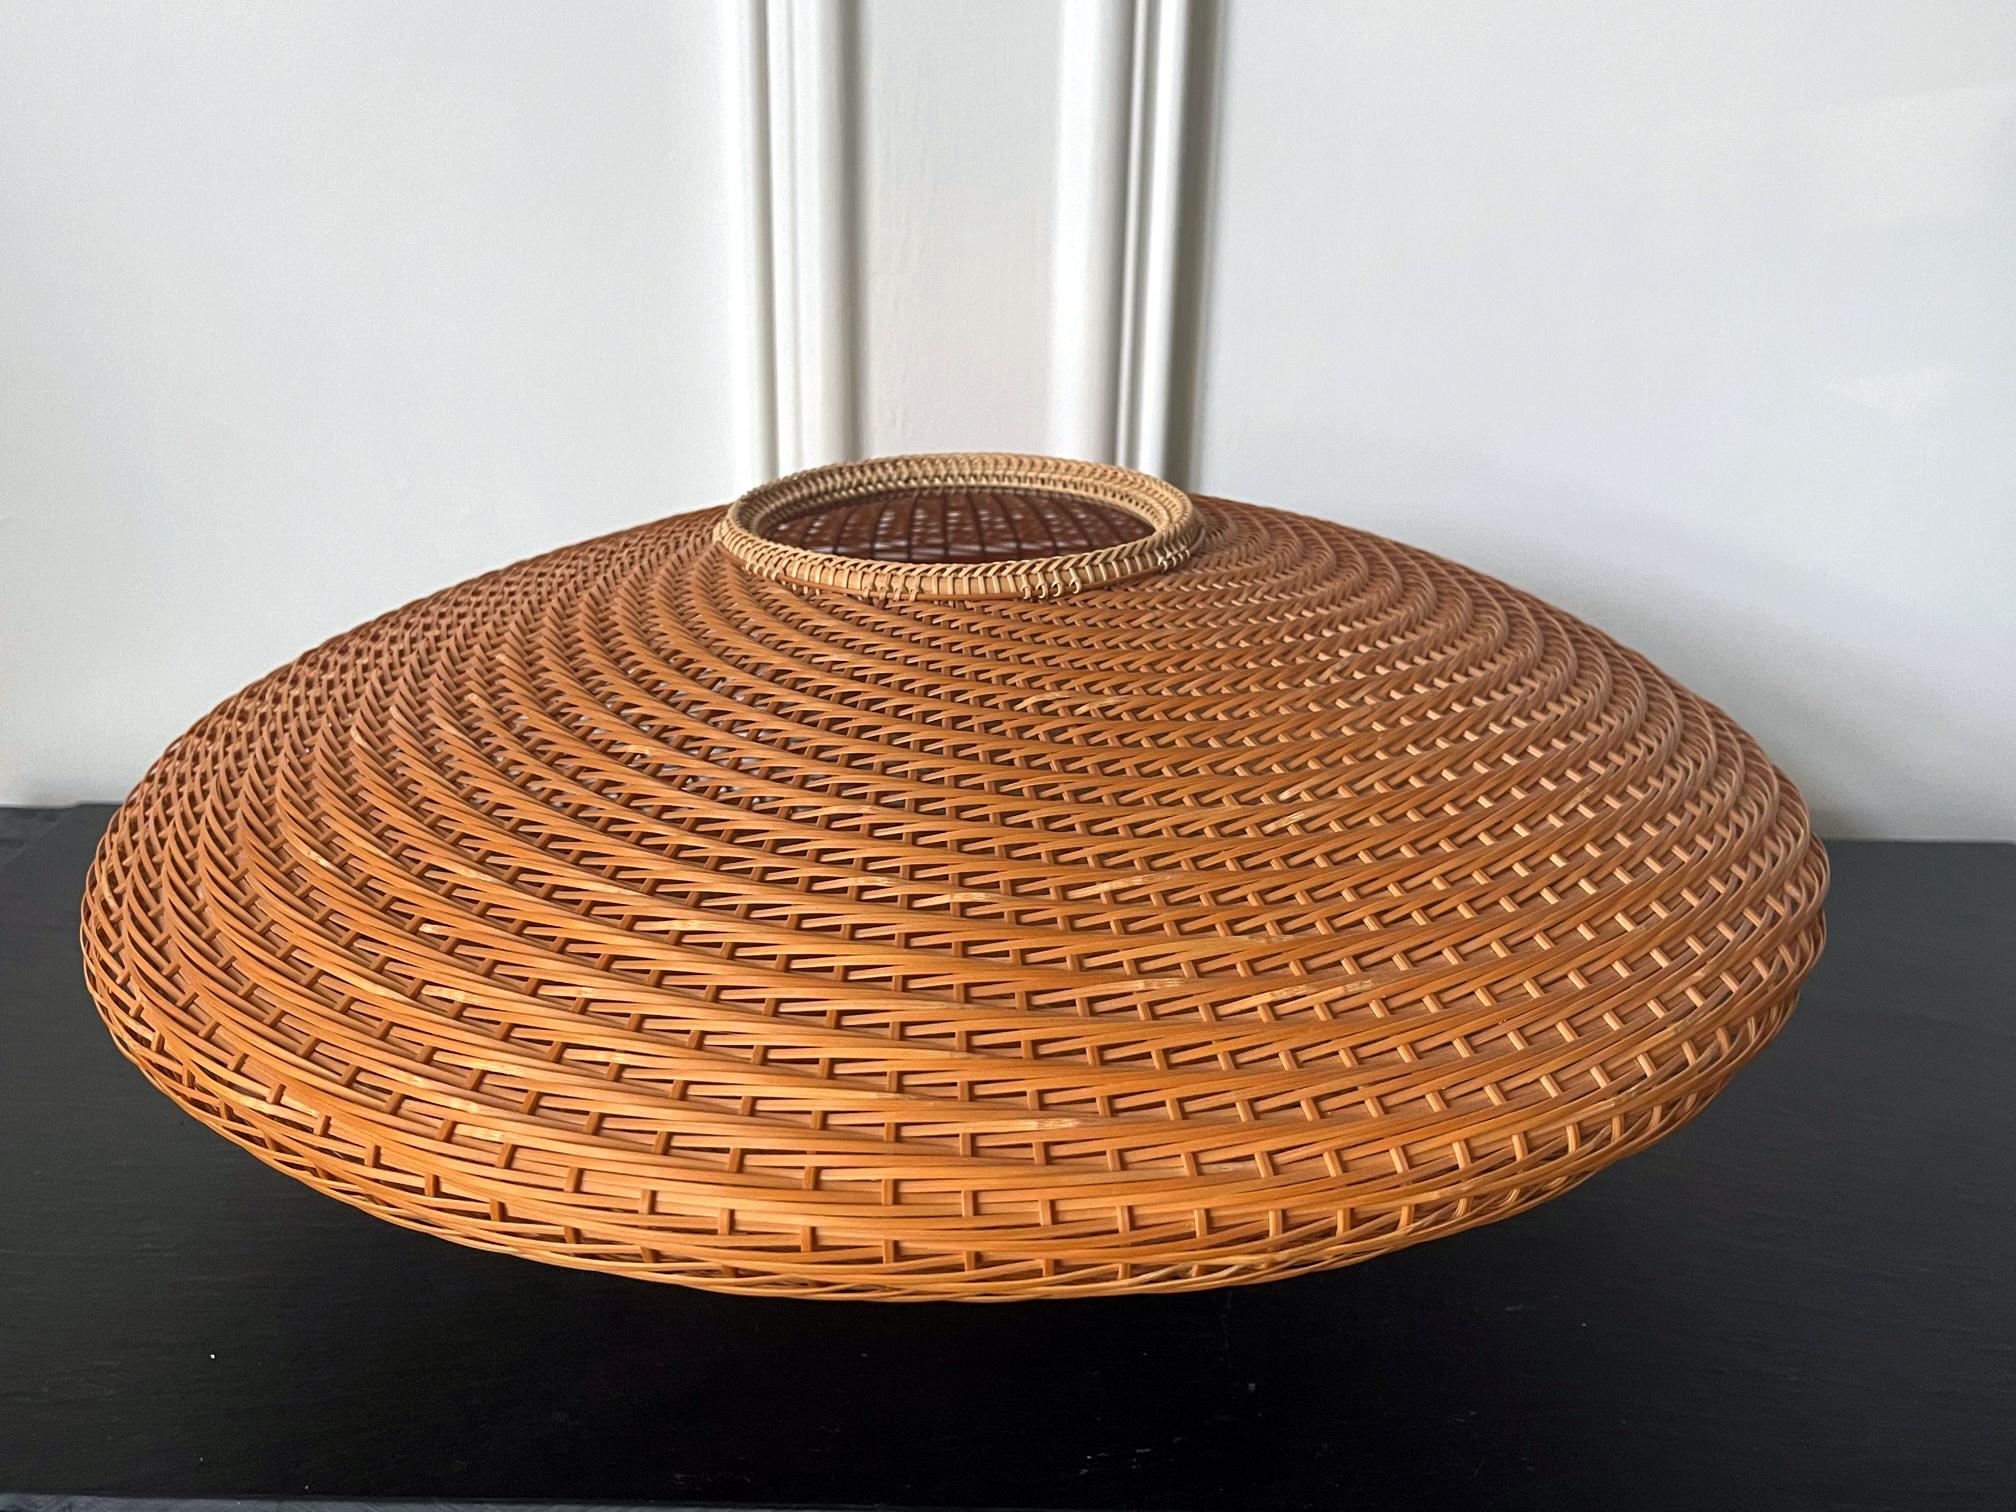 A striking hand-woven bamboo flower basket (ikebana) in the shape of a flying saucer by Japanese artist Nakatomi Hajime (born 1974). Made in 2007, the piece is entitled 